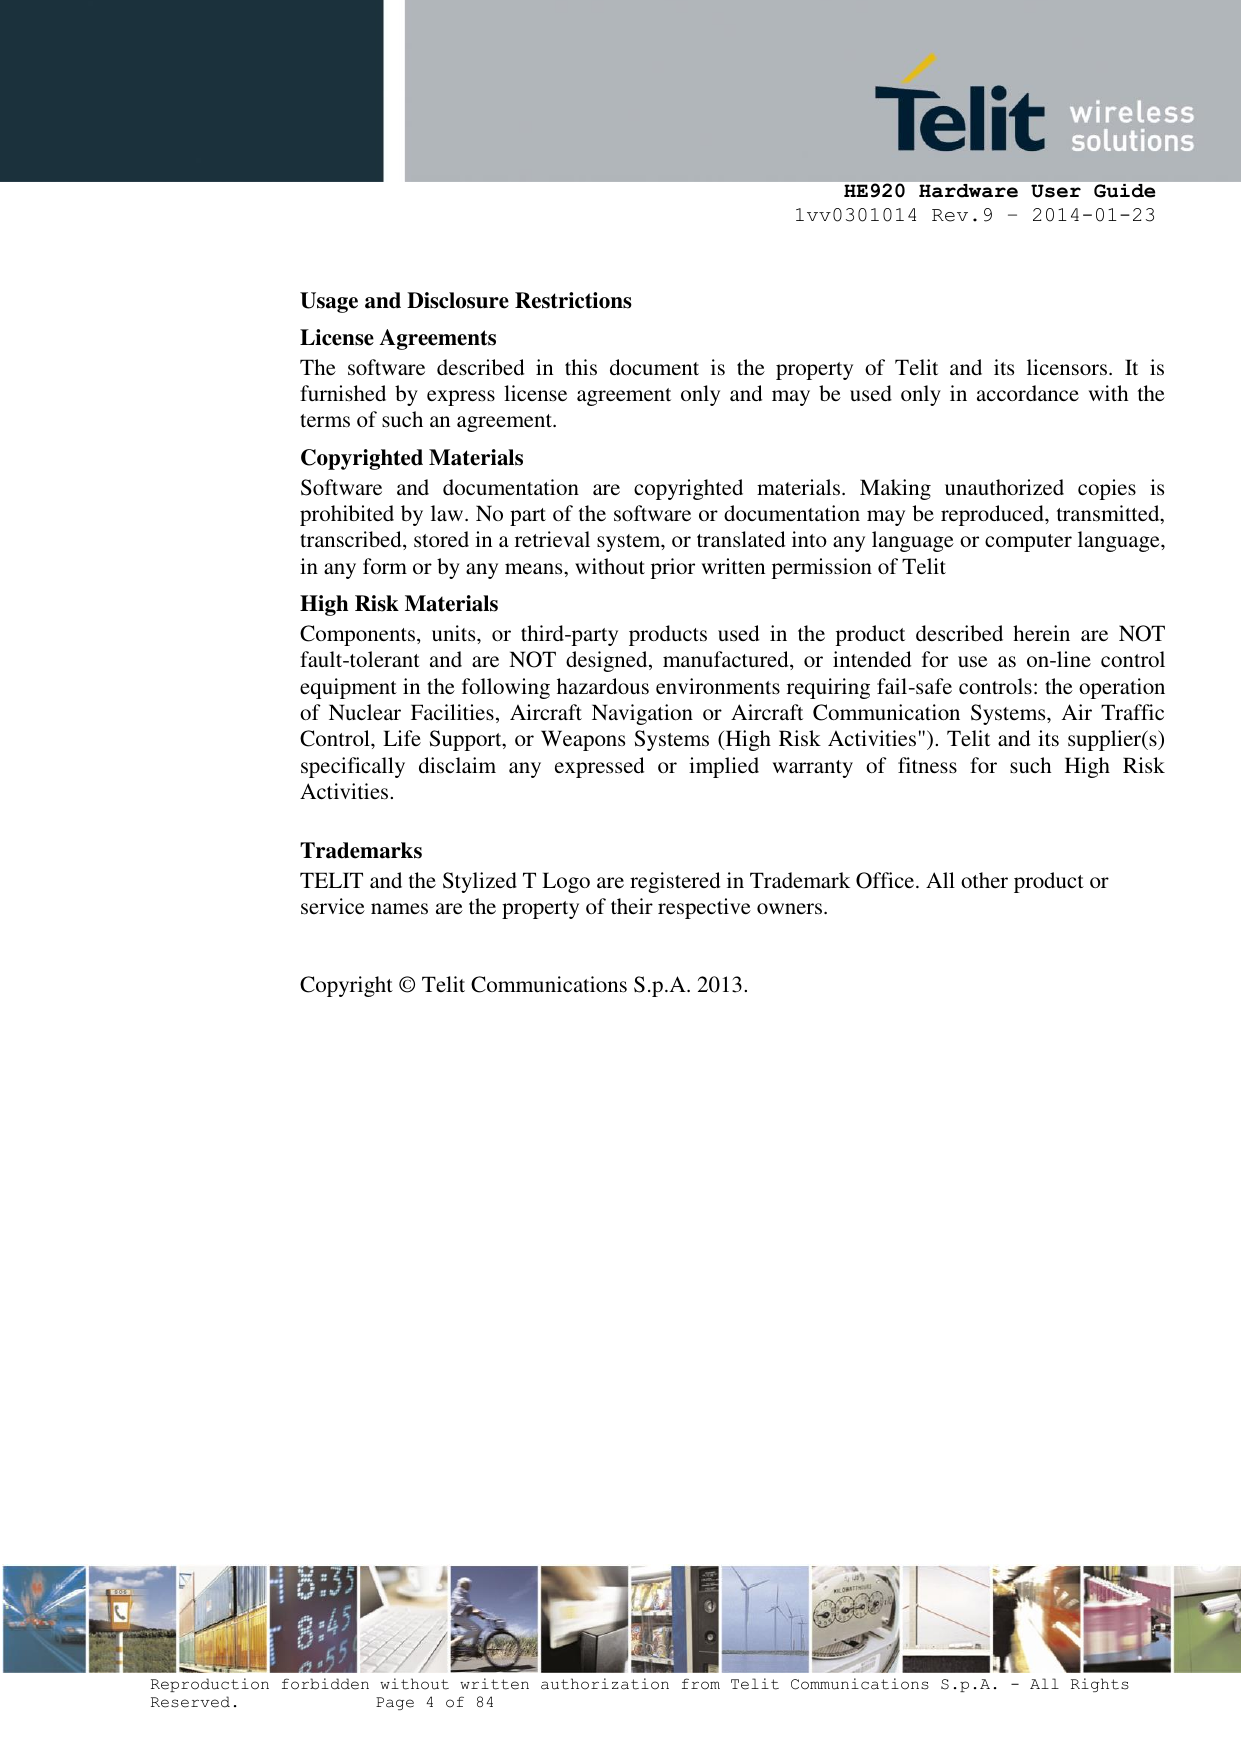     HE920 Hardware User Guide 1vv0301014 Rev.9 – 2014-01-23 Reproduction forbidden without written authorization from Telit Communications S.p.A. - All Rights Reserved.    Page 4 of 84  Usage and Disclosure Restrictions License Agreements The  software  described  in  this  document  is  the  property  of  Telit  and  its  licensors.  It  is furnished by express license agreement only and may be used only in accordance with the terms of such an agreement. Copyrighted Materials Software  and  documentation  are  copyrighted  materials.  Making  unauthorized  copies  is prohibited by law. No part of the software or documentation may be reproduced, transmitted, transcribed, stored in a retrieval system, or translated into any language or computer language, in any form or by any means, without prior written permission of Telit High Risk Materials Components,  units,  or  third-party  products  used  in  the  product  described  herein  are  NOT fault-tolerant and  are  NOT  designed, manufactured, or  intended  for  use  as  on-line  control equipment in the following hazardous environments requiring fail-safe controls: the operation of  Nuclear  Facilities,  Aircraft Navigation  or  Aircraft  Communication  Systems, Air  Traffic Control, Life Support, or Weapons Systems (High Risk Activities&quot;). Telit and its supplier(s) specifically  disclaim  any  expressed  or  implied  warranty  of  fitness  for  such  High  Risk Activities. Trademarks TELIT and the Stylized T Logo are registered in Trademark Office. All other product or service names are the property of their respective owners.   Copyright ©  Telit Communications S.p.A. 2013.   